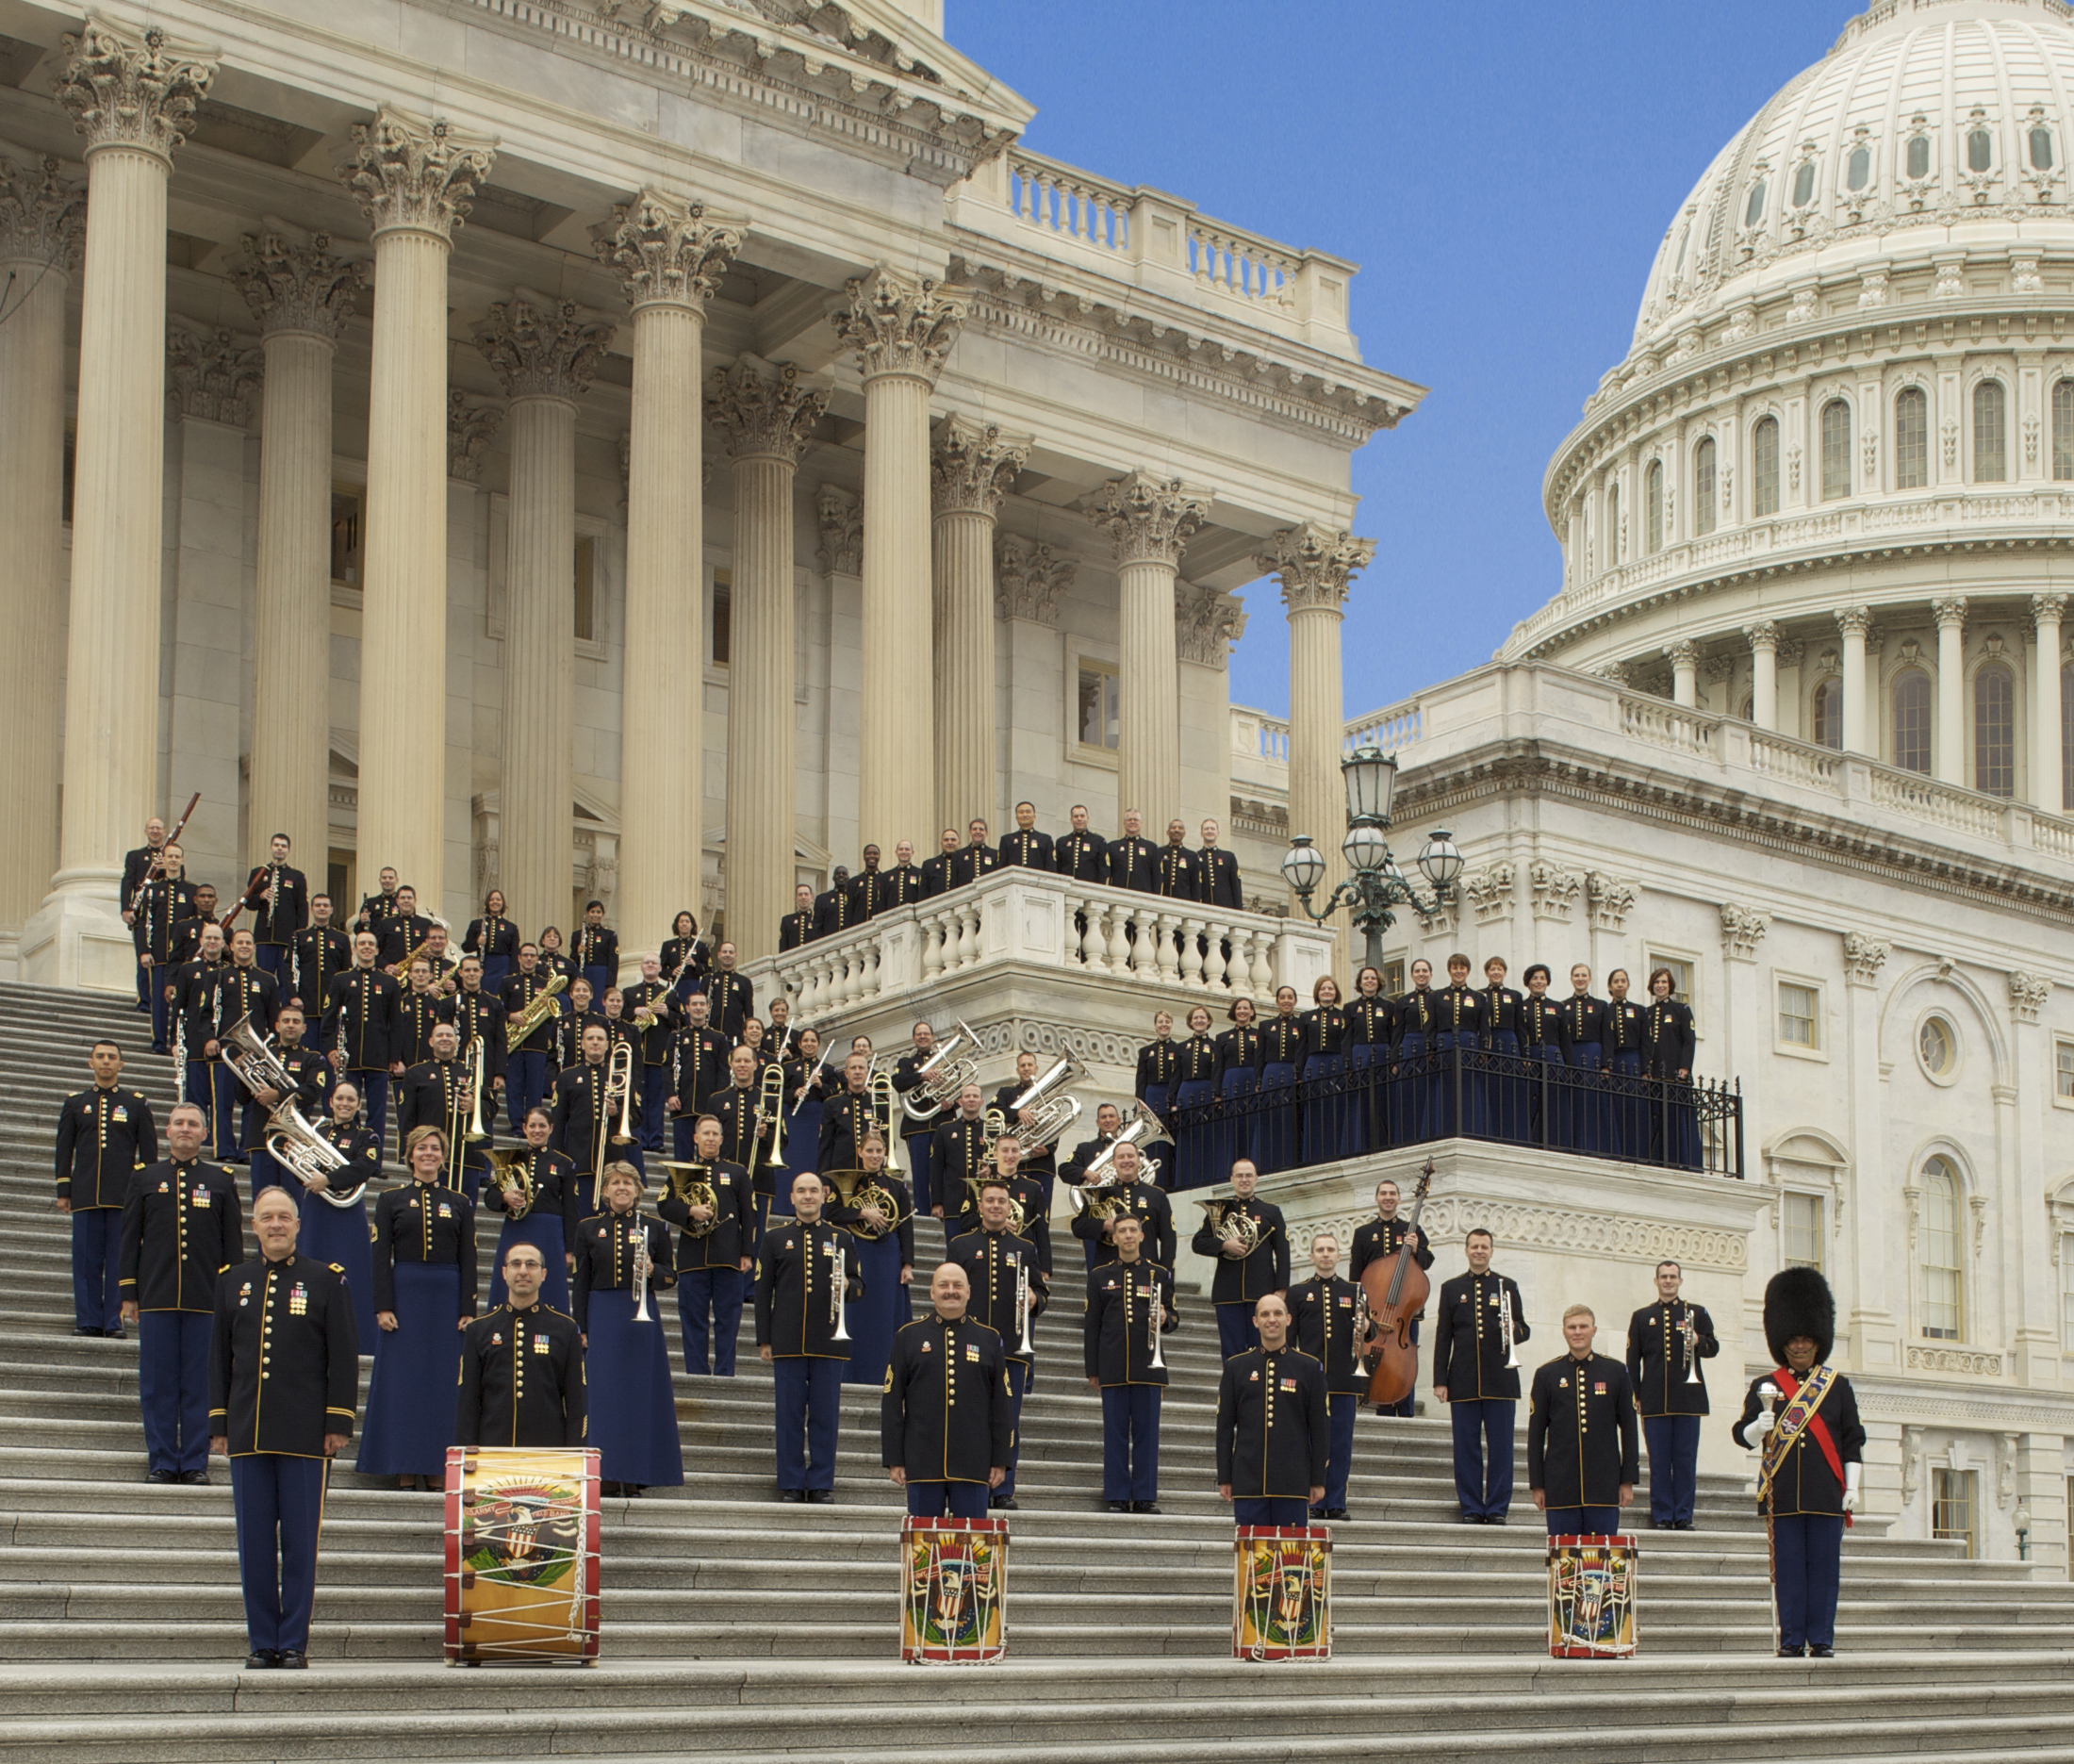 Singing praise: U.S. Army Field Band and Soldiers’ Chorus to perform at the Haugh in honor of Veteran’s Day